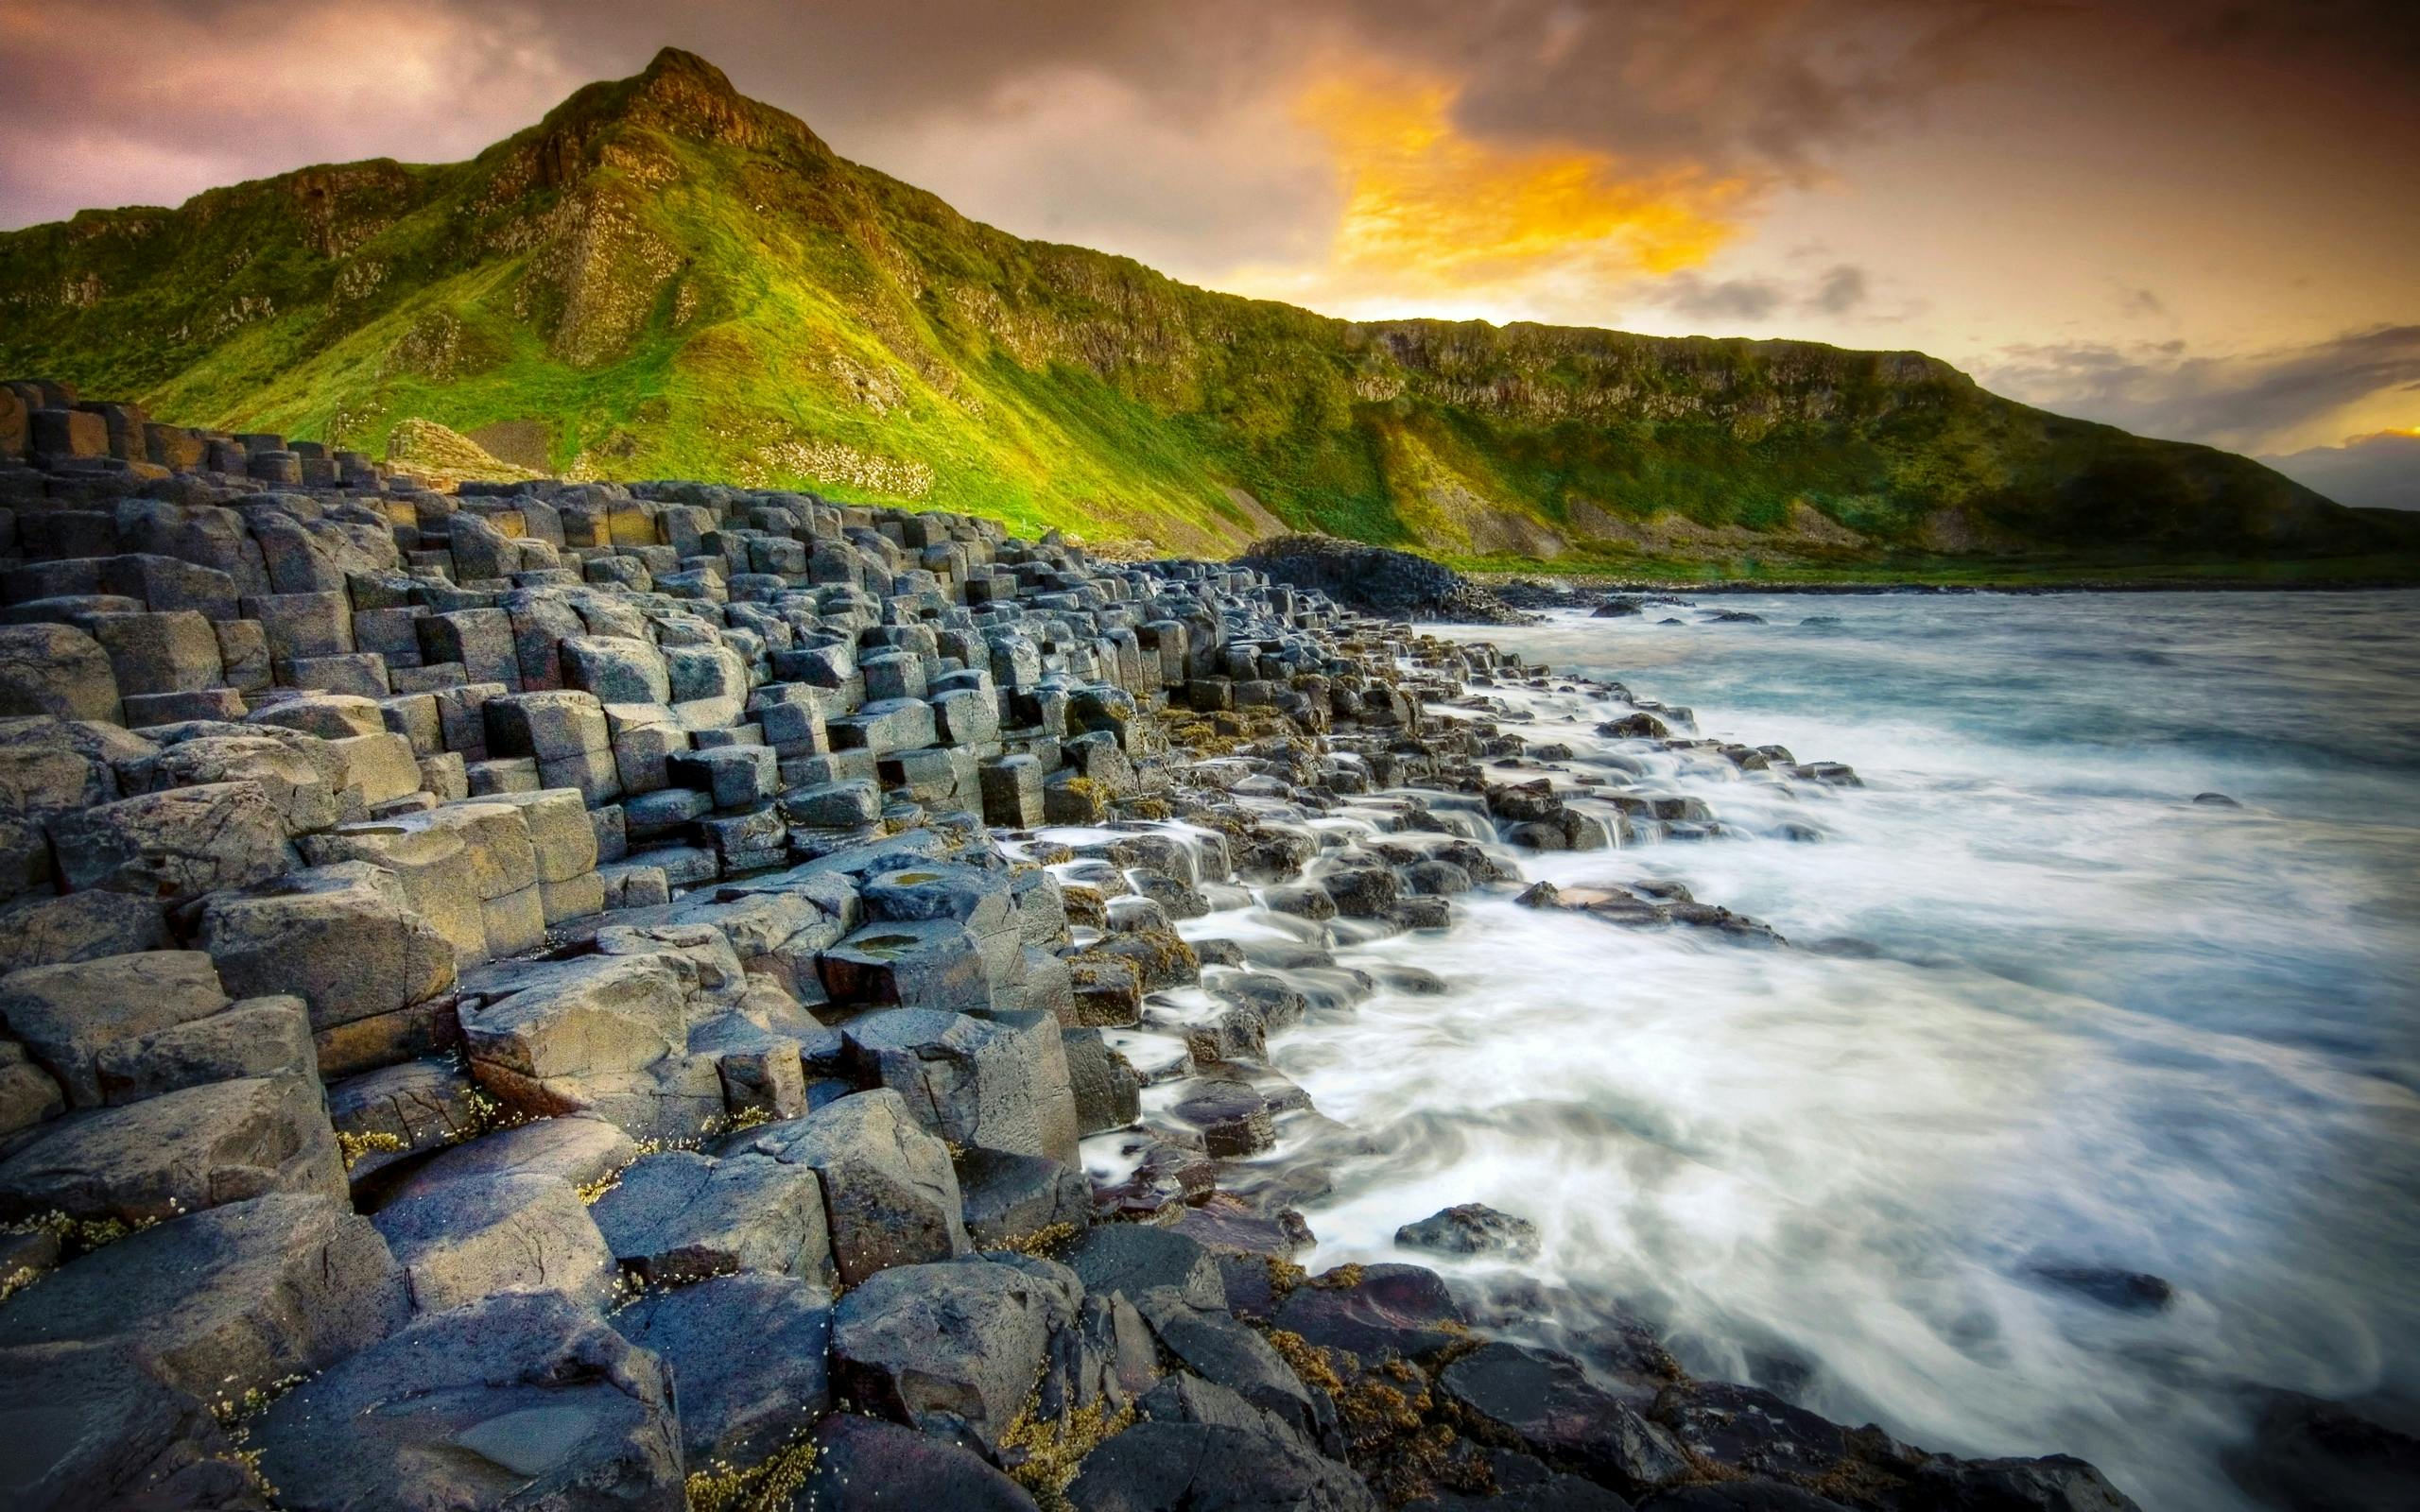 Game of Thrones tour with Giant’s Causeway from Belfast